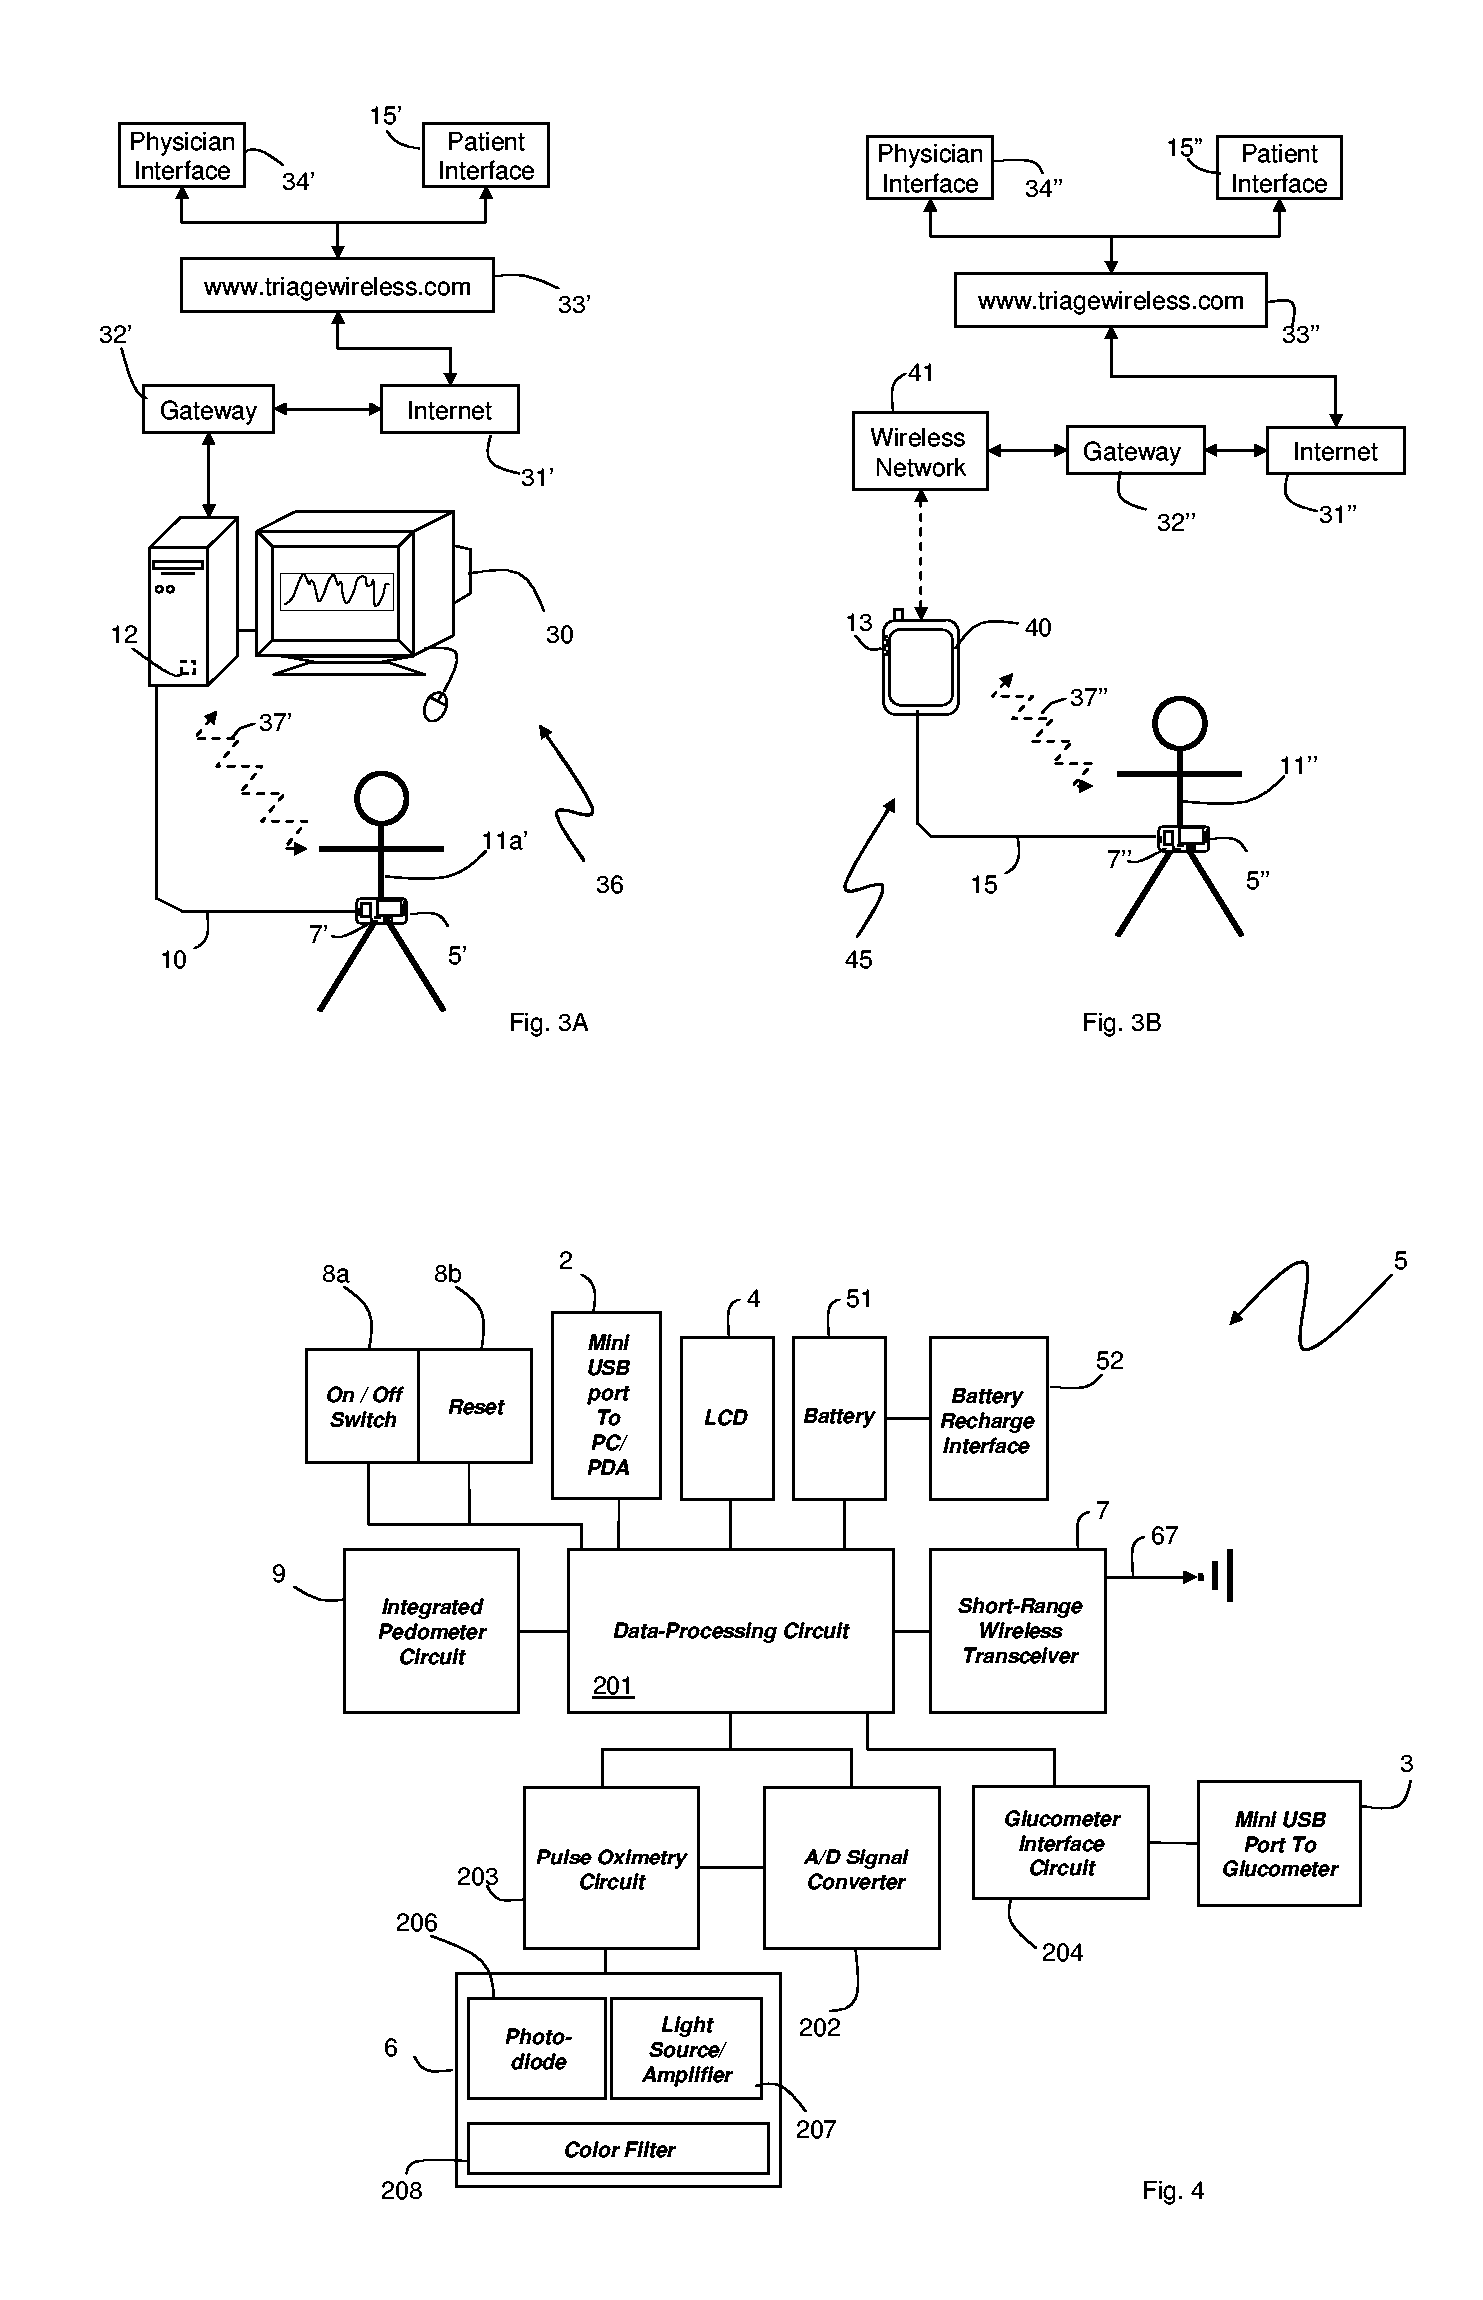 Small-scale, vital-signs monitoring device, system and method